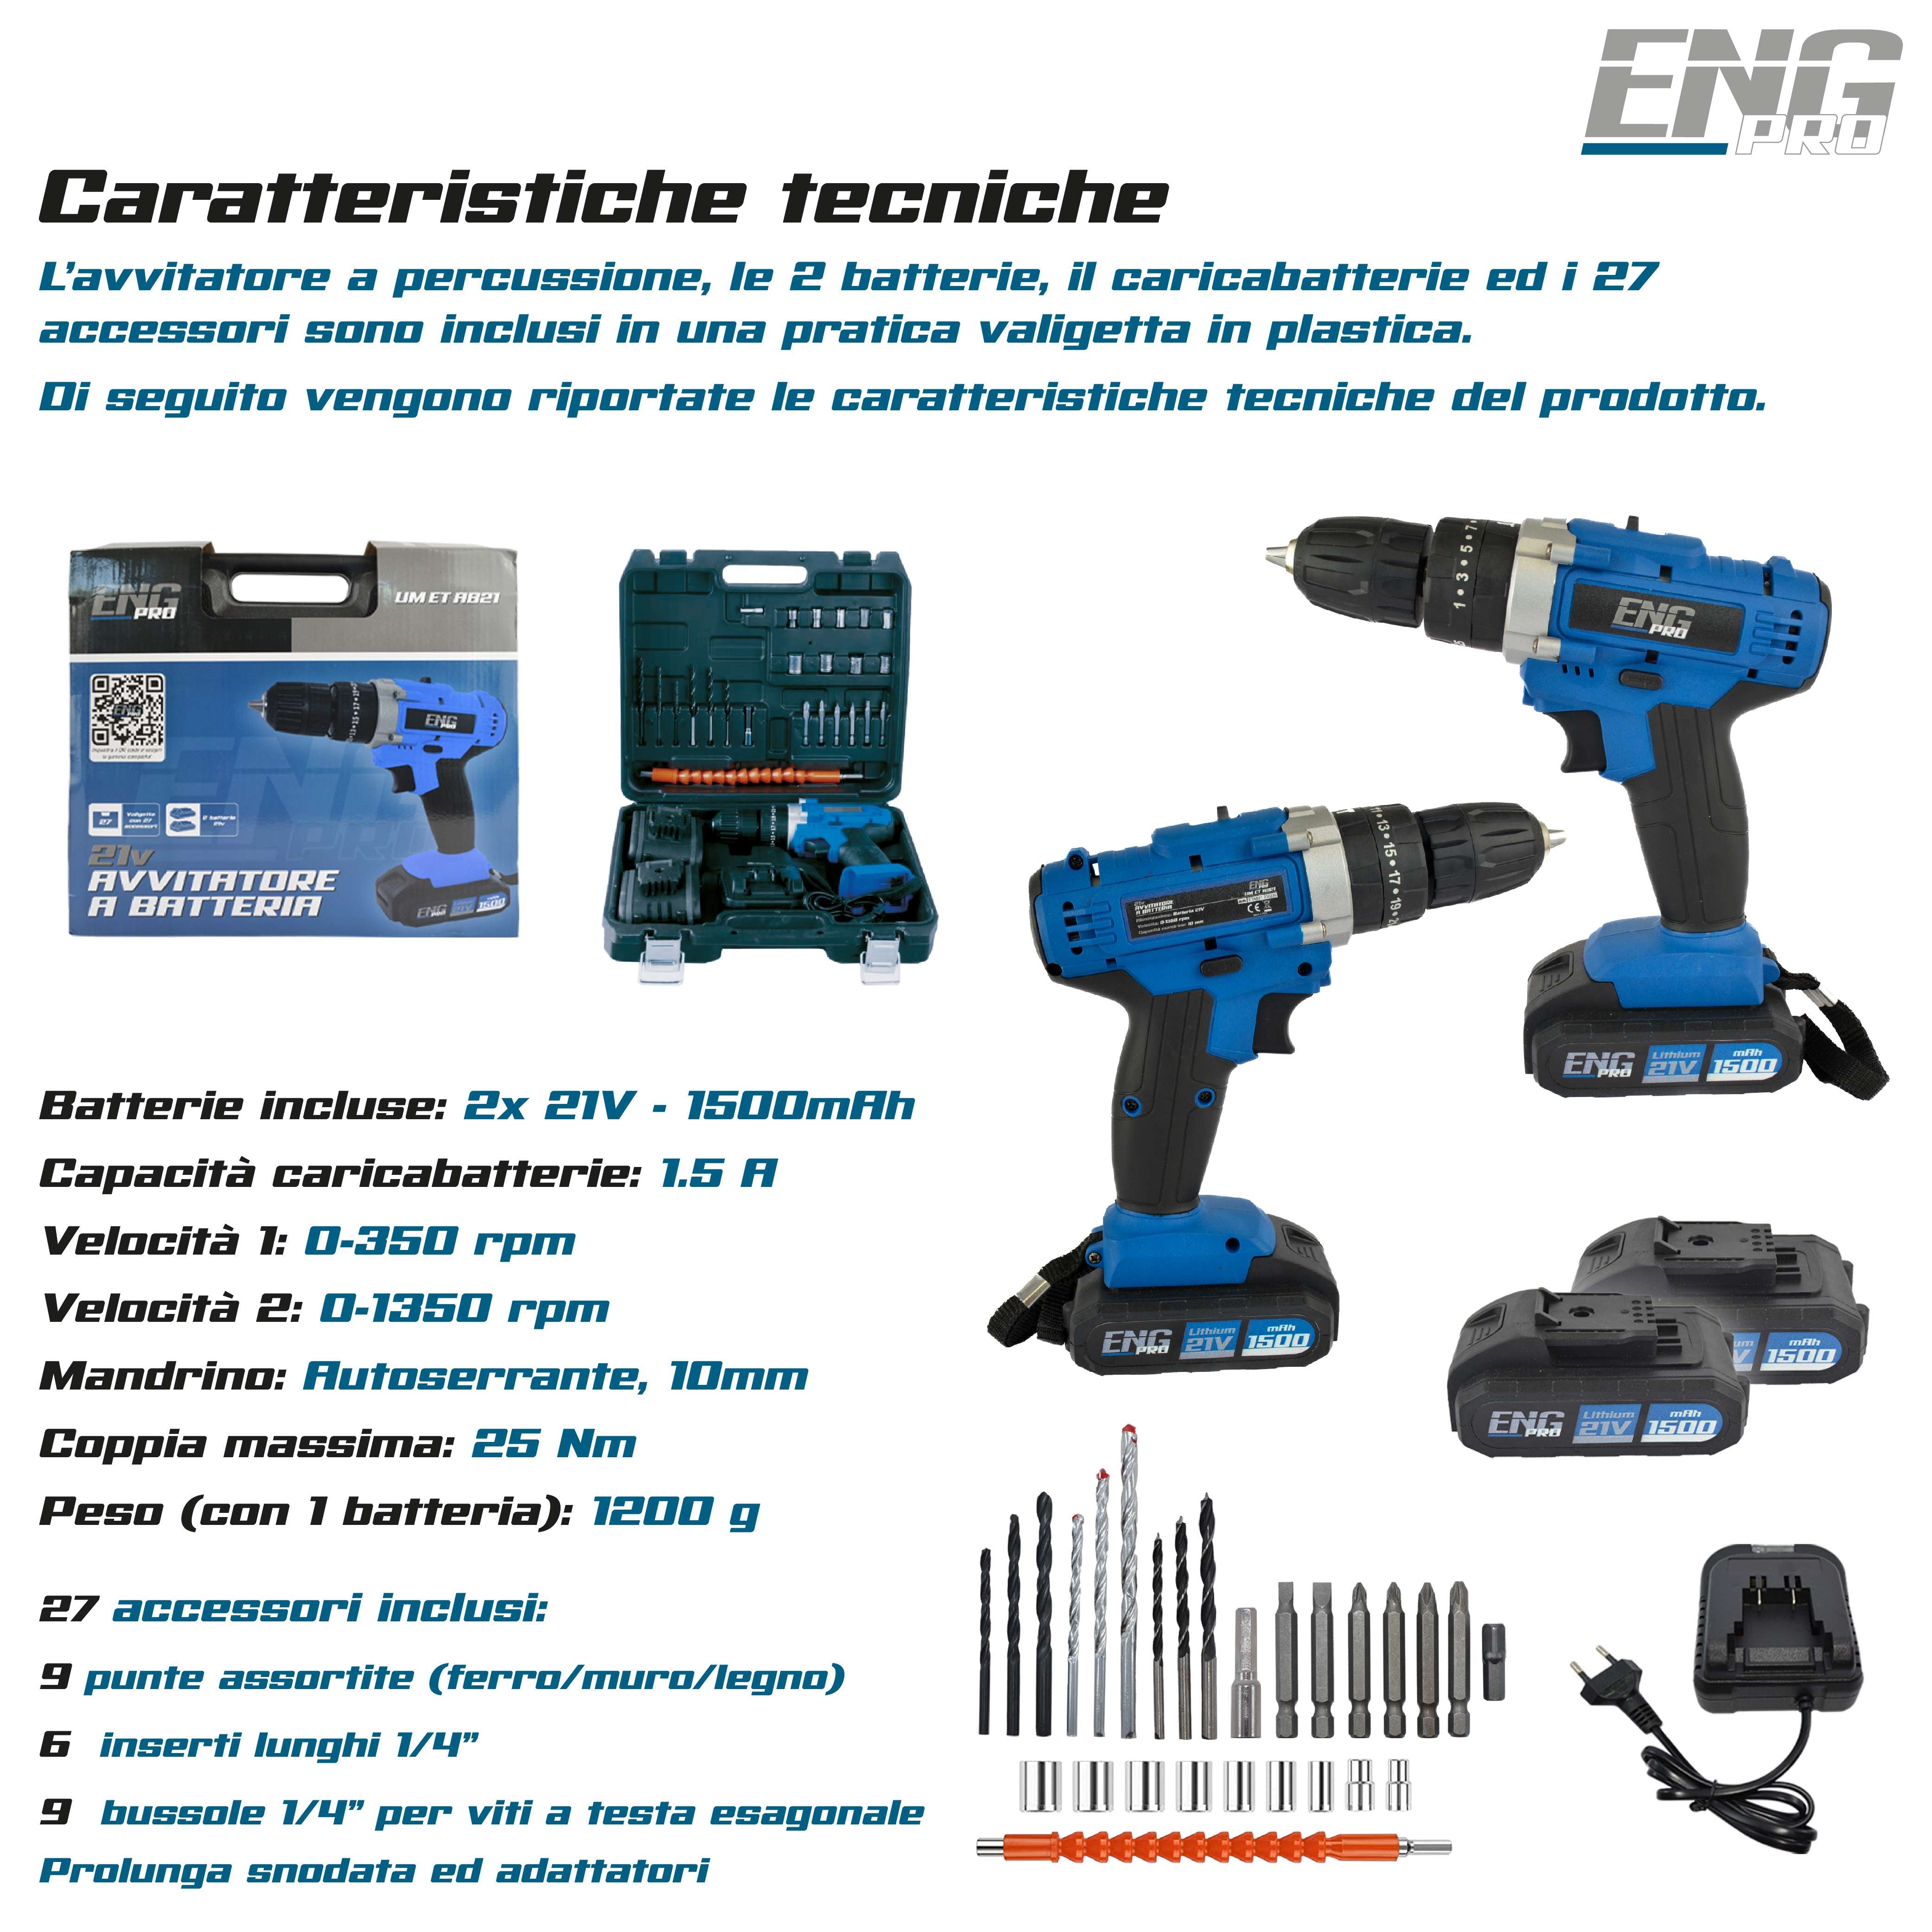 Cordless combi drill 21V with 24 accessories and 2 batteries incuded - ENG PRO